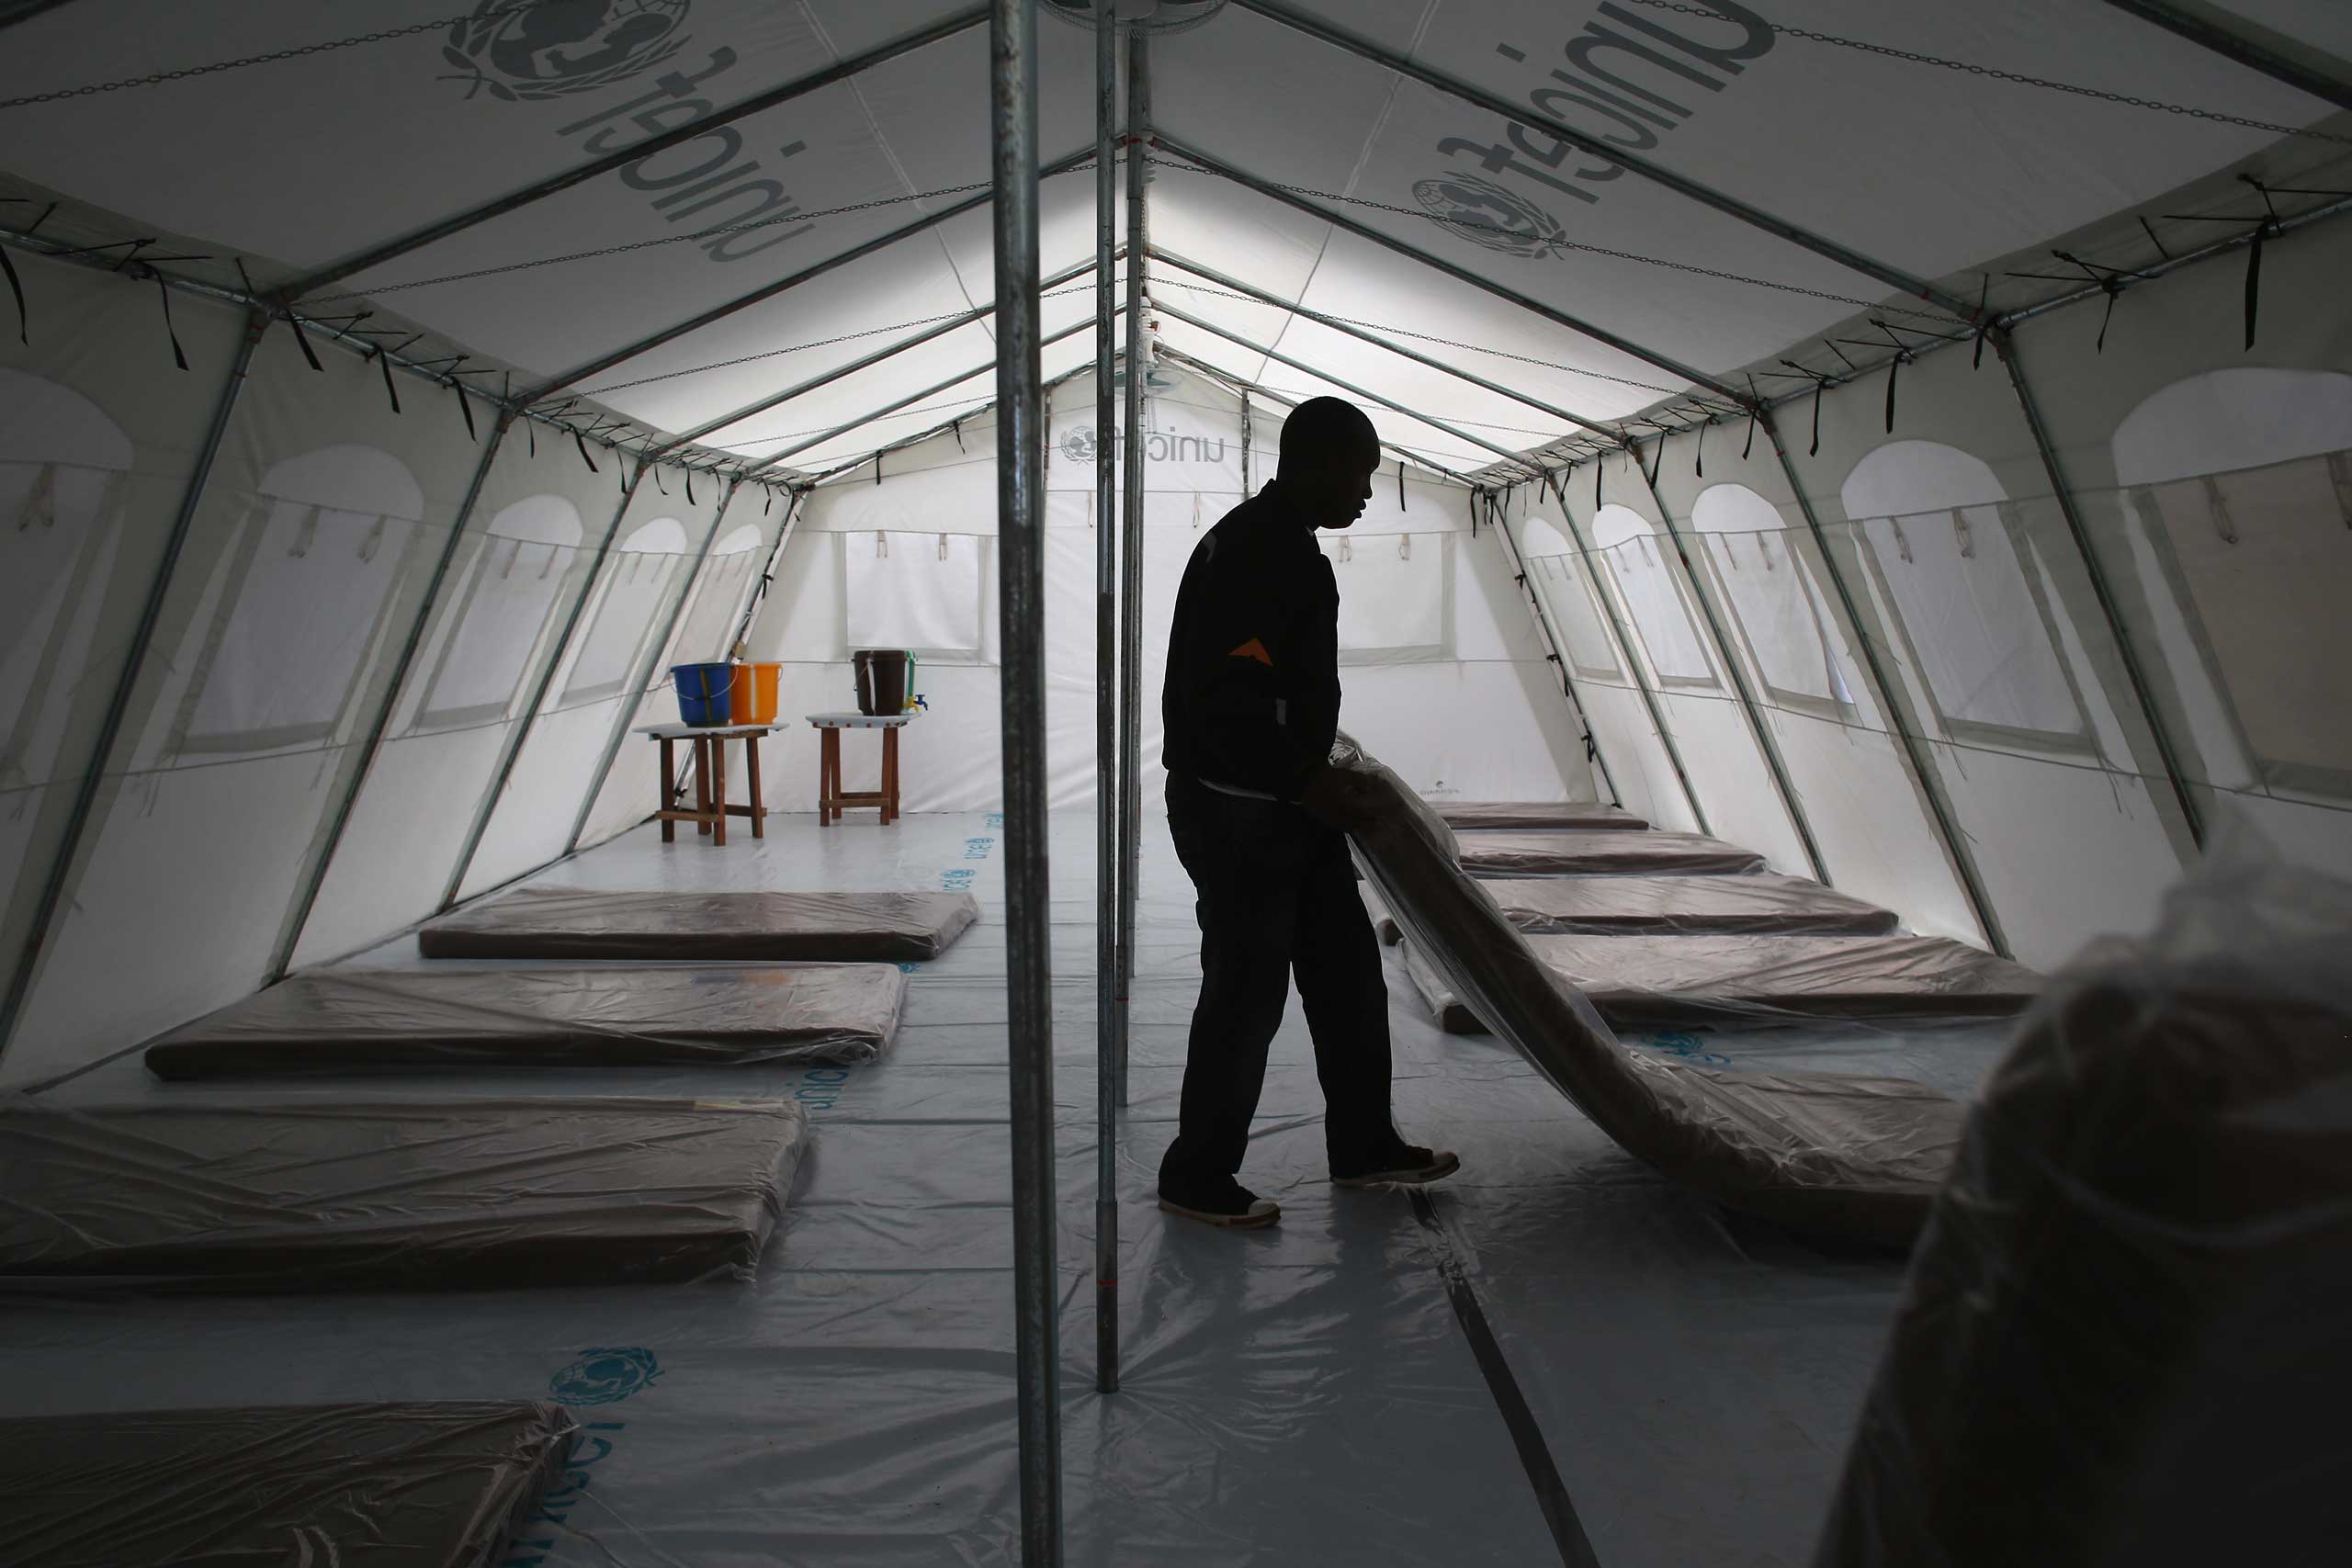 Workers prepare the new Doctors Without Borders Ebola treatment center on Aug. 17, 2014 near Monrovia.